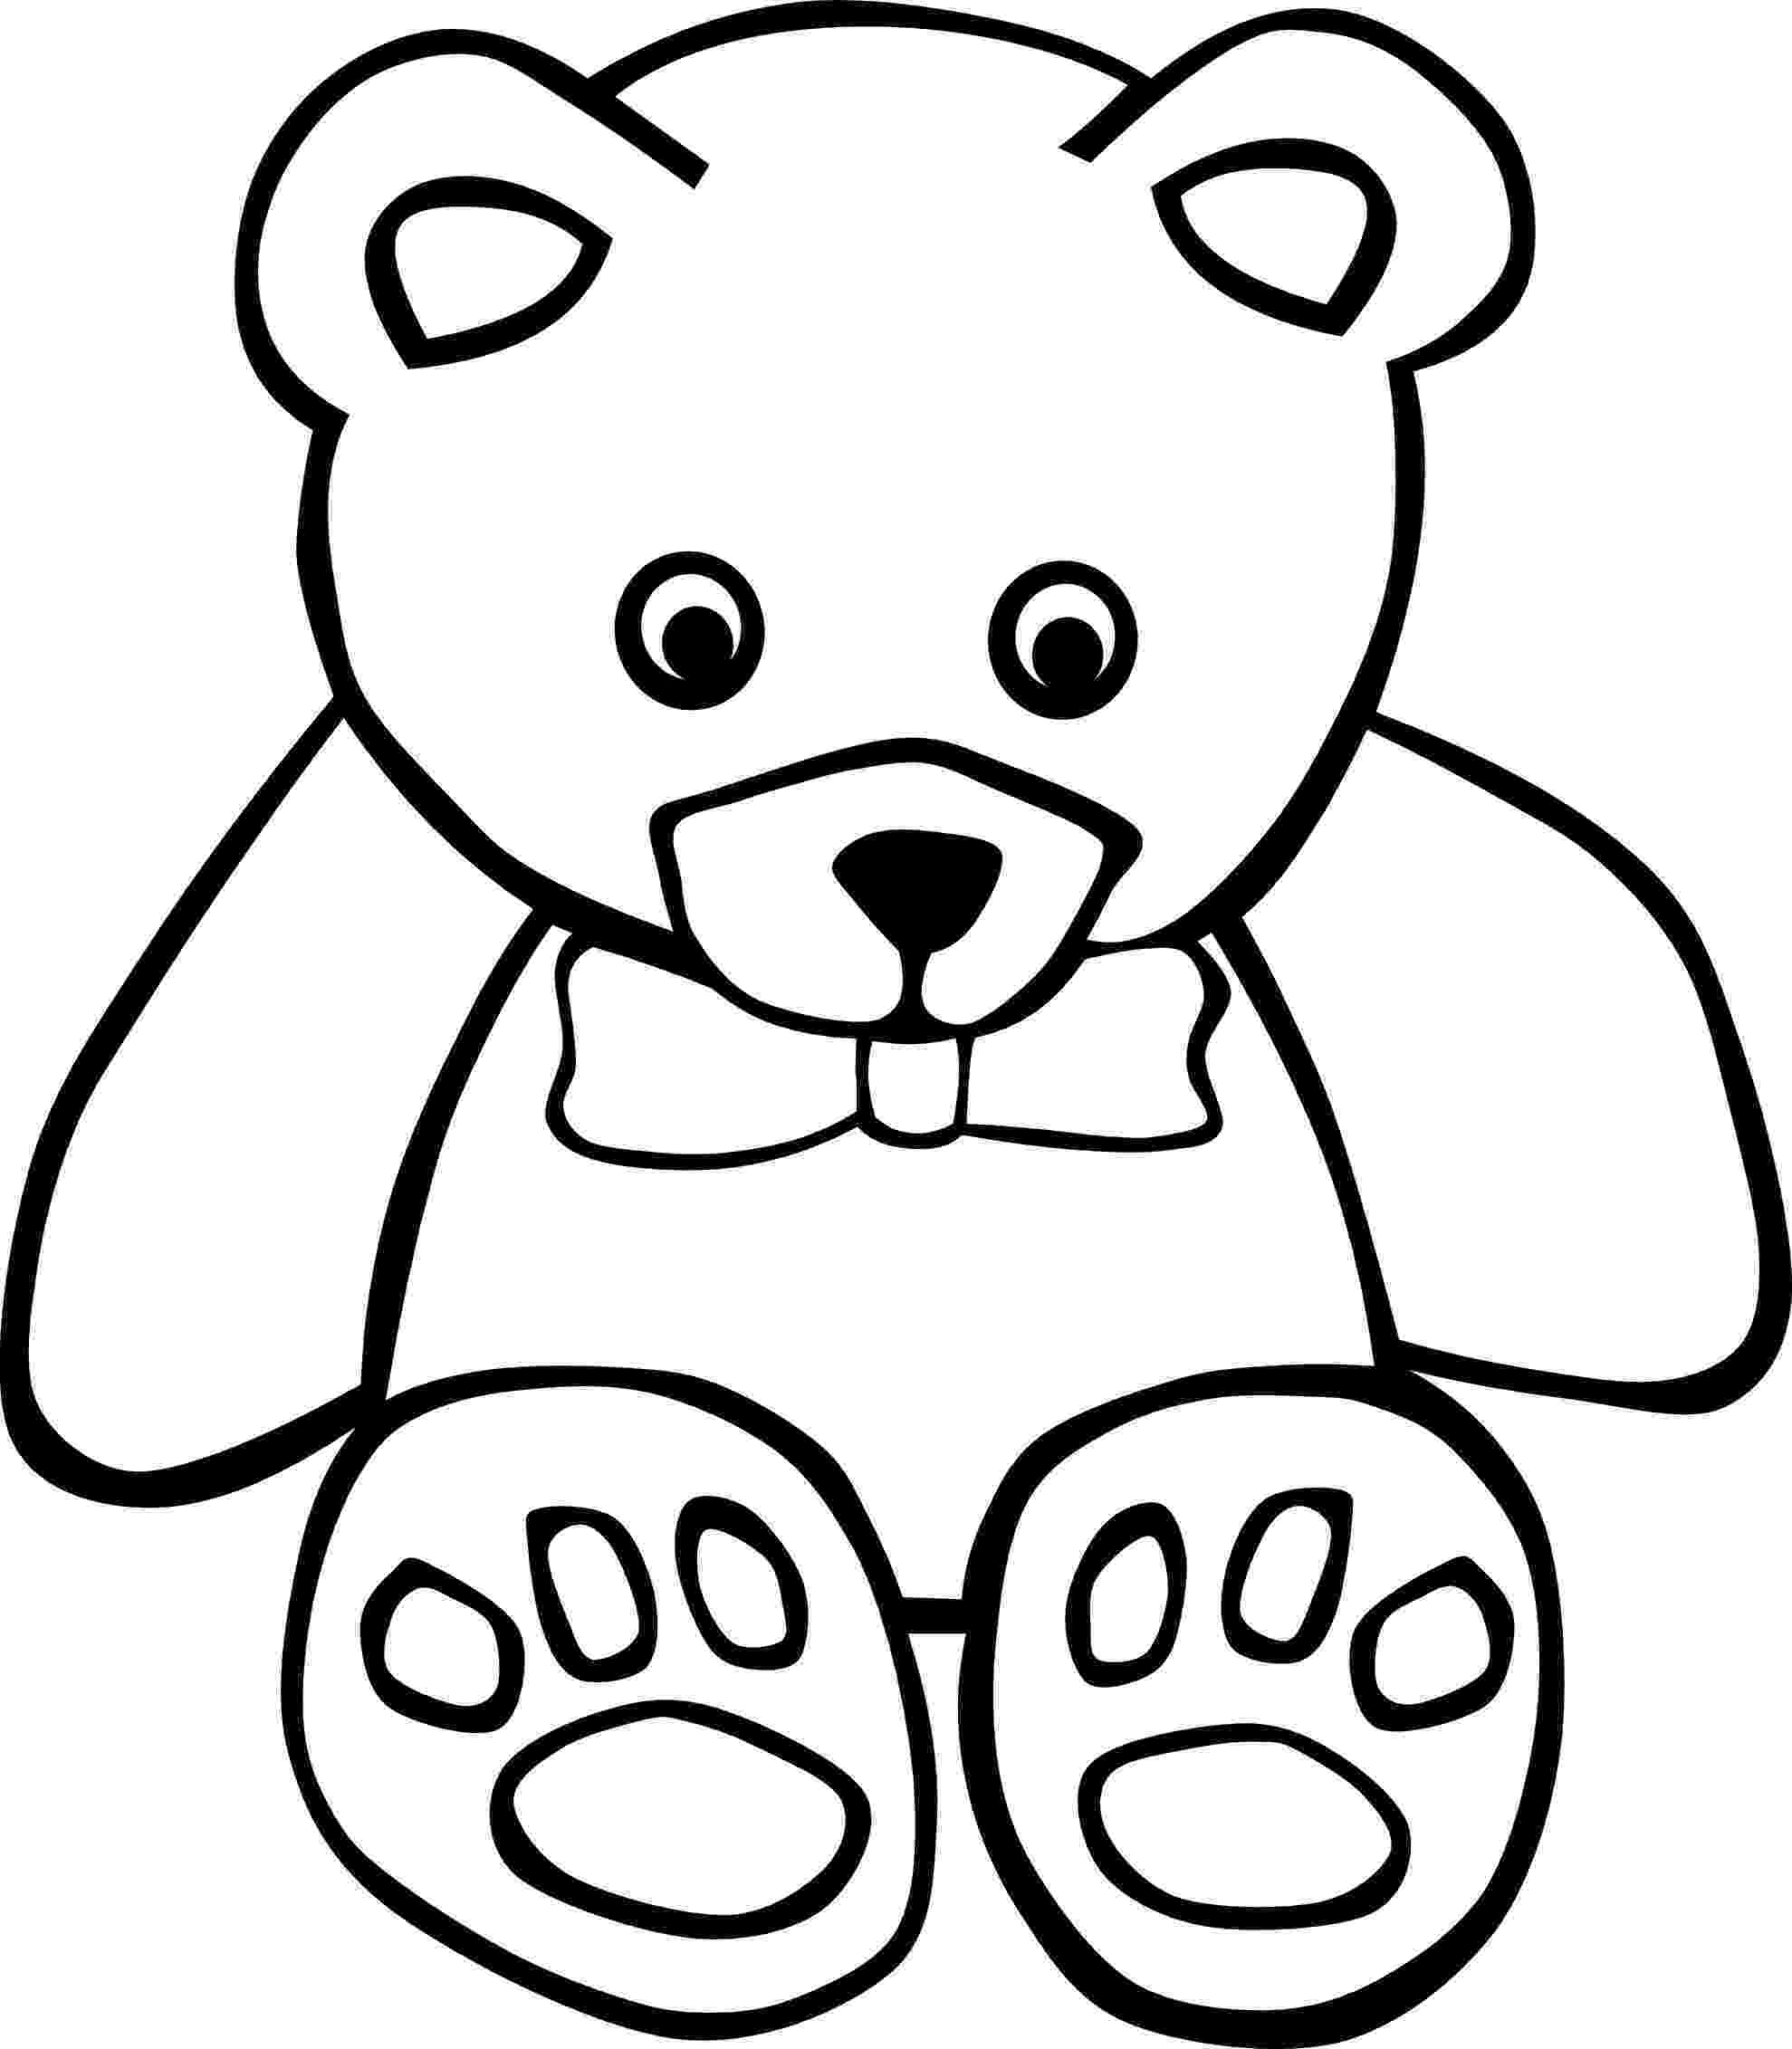 teddy bear coloring pictures free printable teddy bear coloring pages for kids pictures bear teddy coloring 